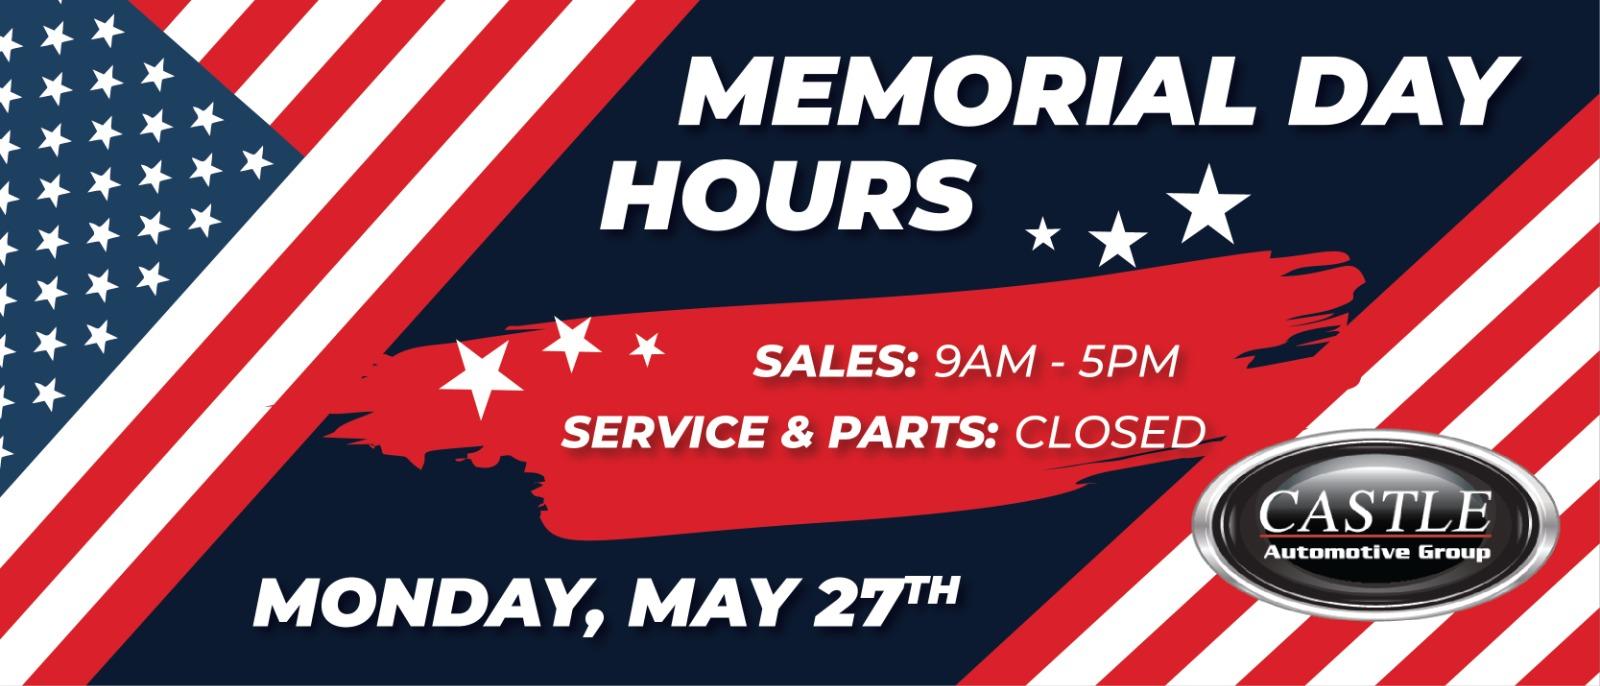 Memorial Day Holiday Hours